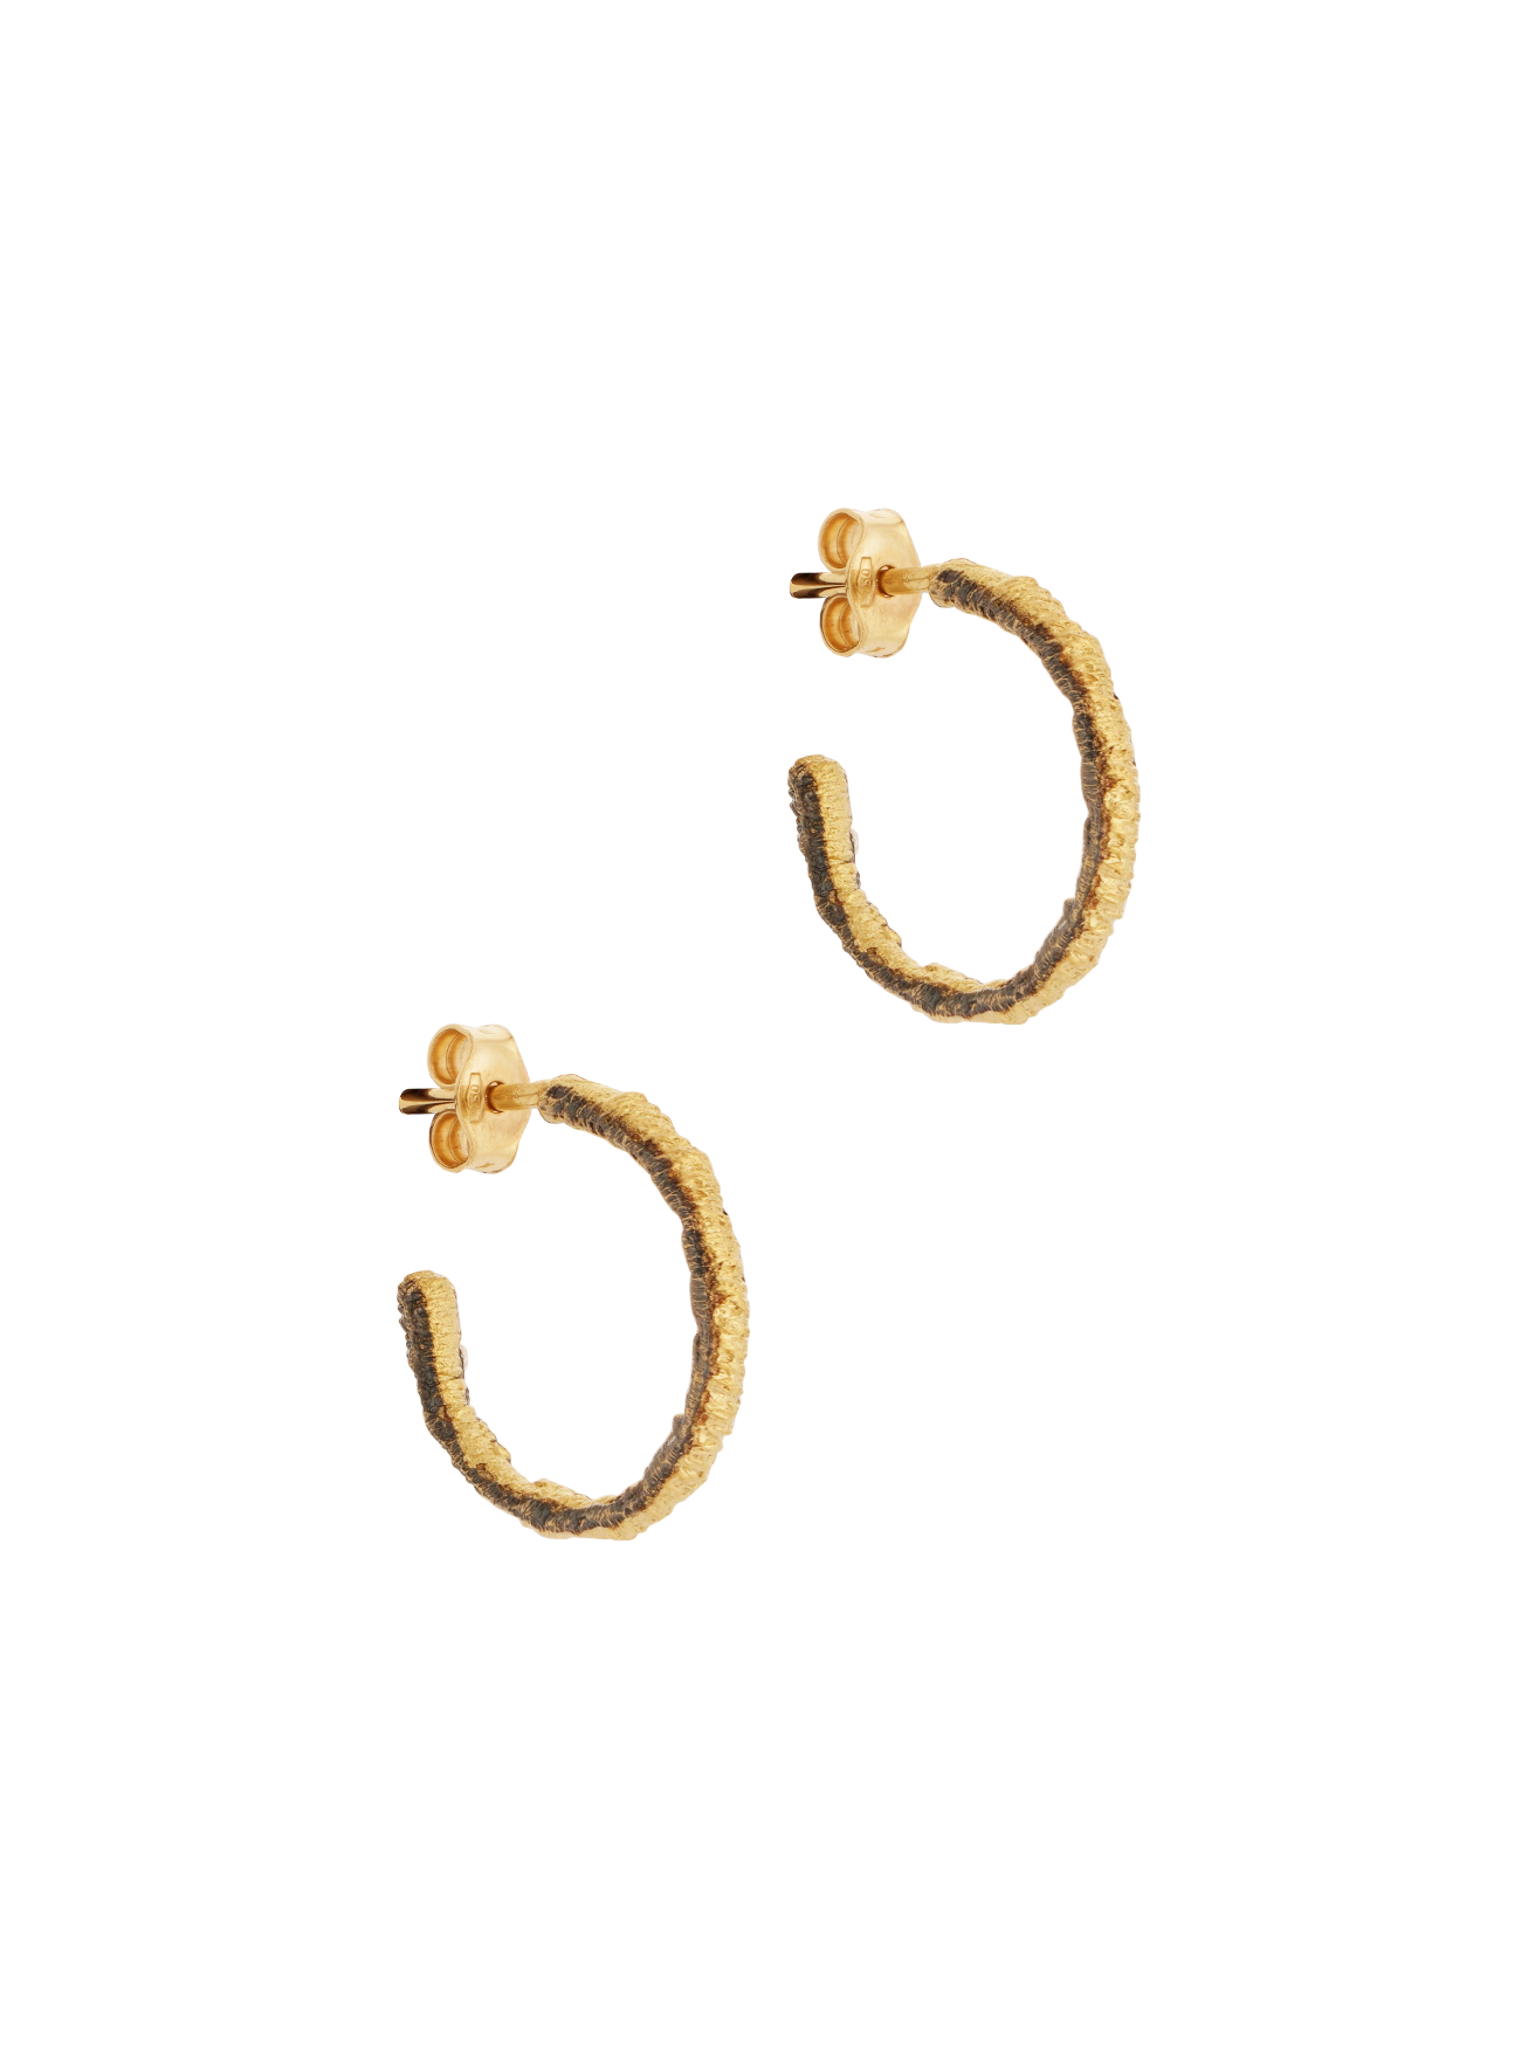 Straight stitch hoop earrings with black borders, small